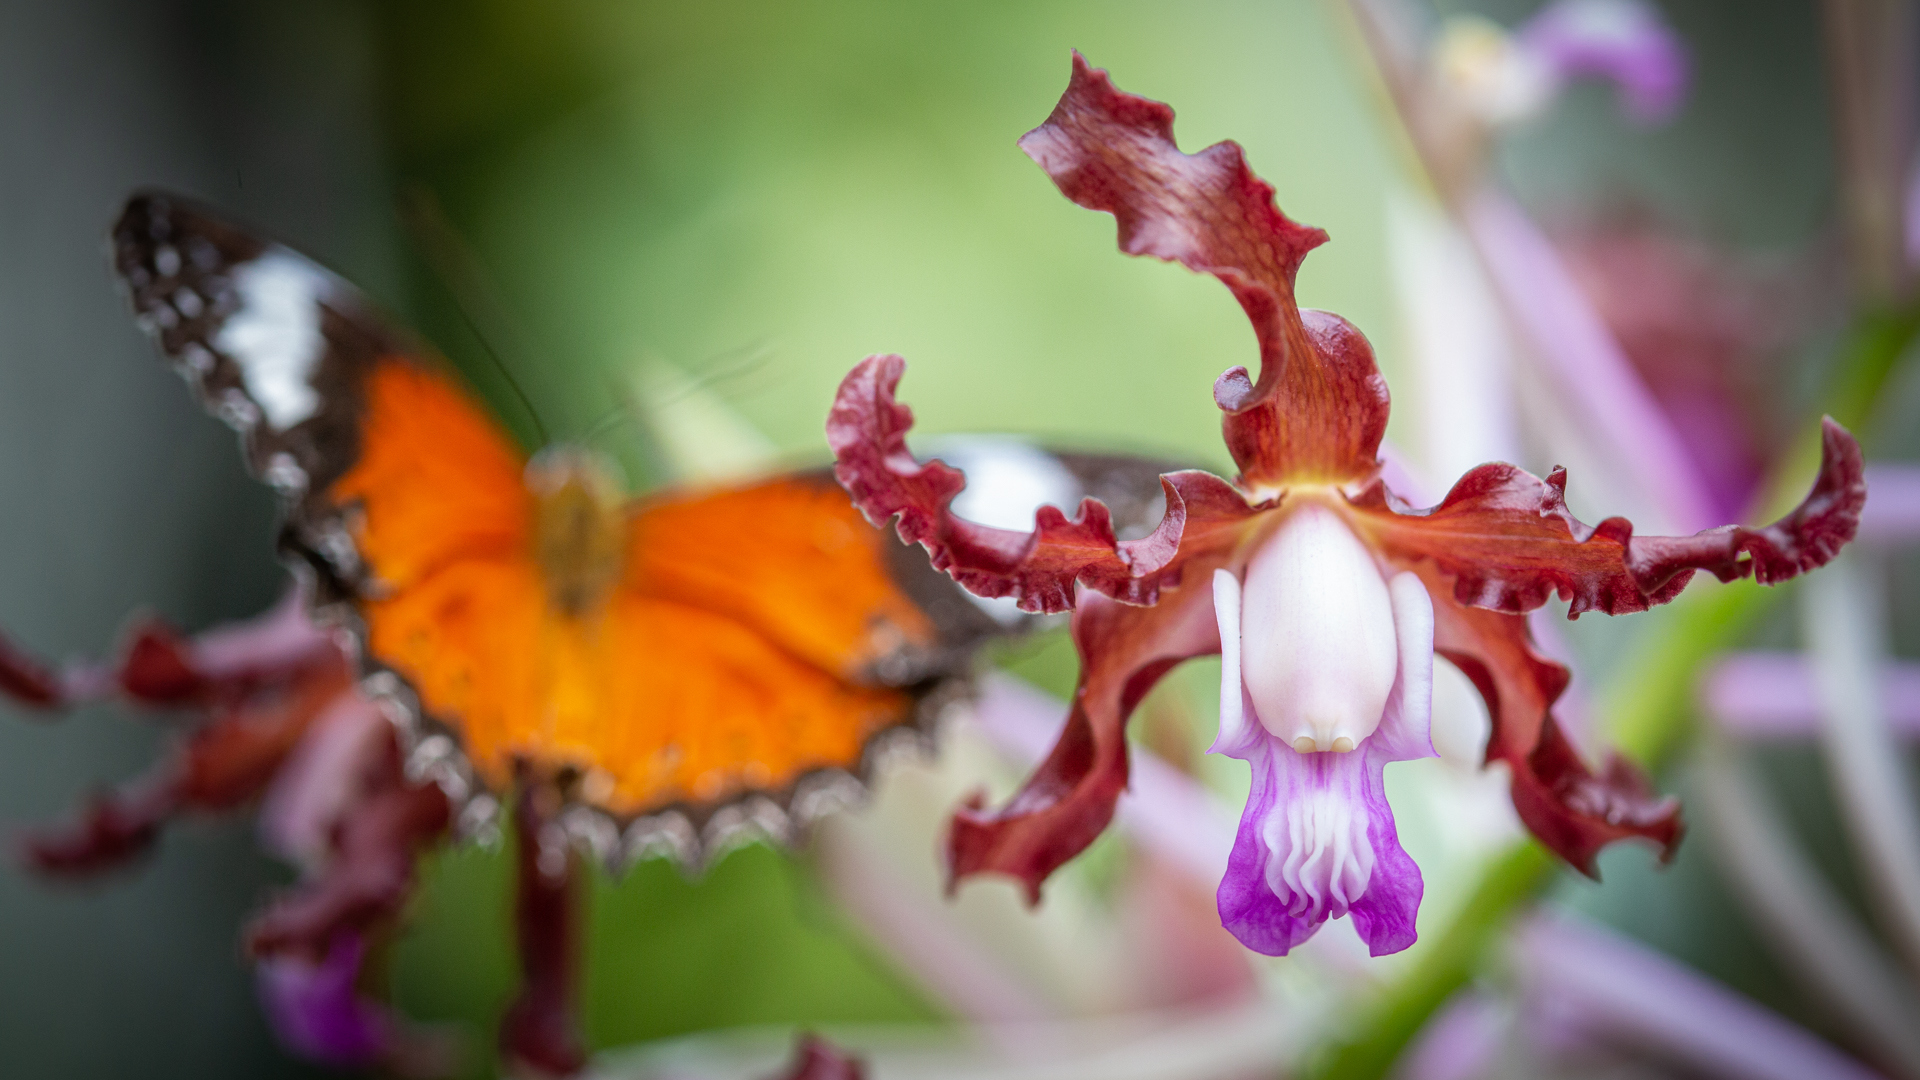 Orange lacewing butterfly near a purple and maroon orchid